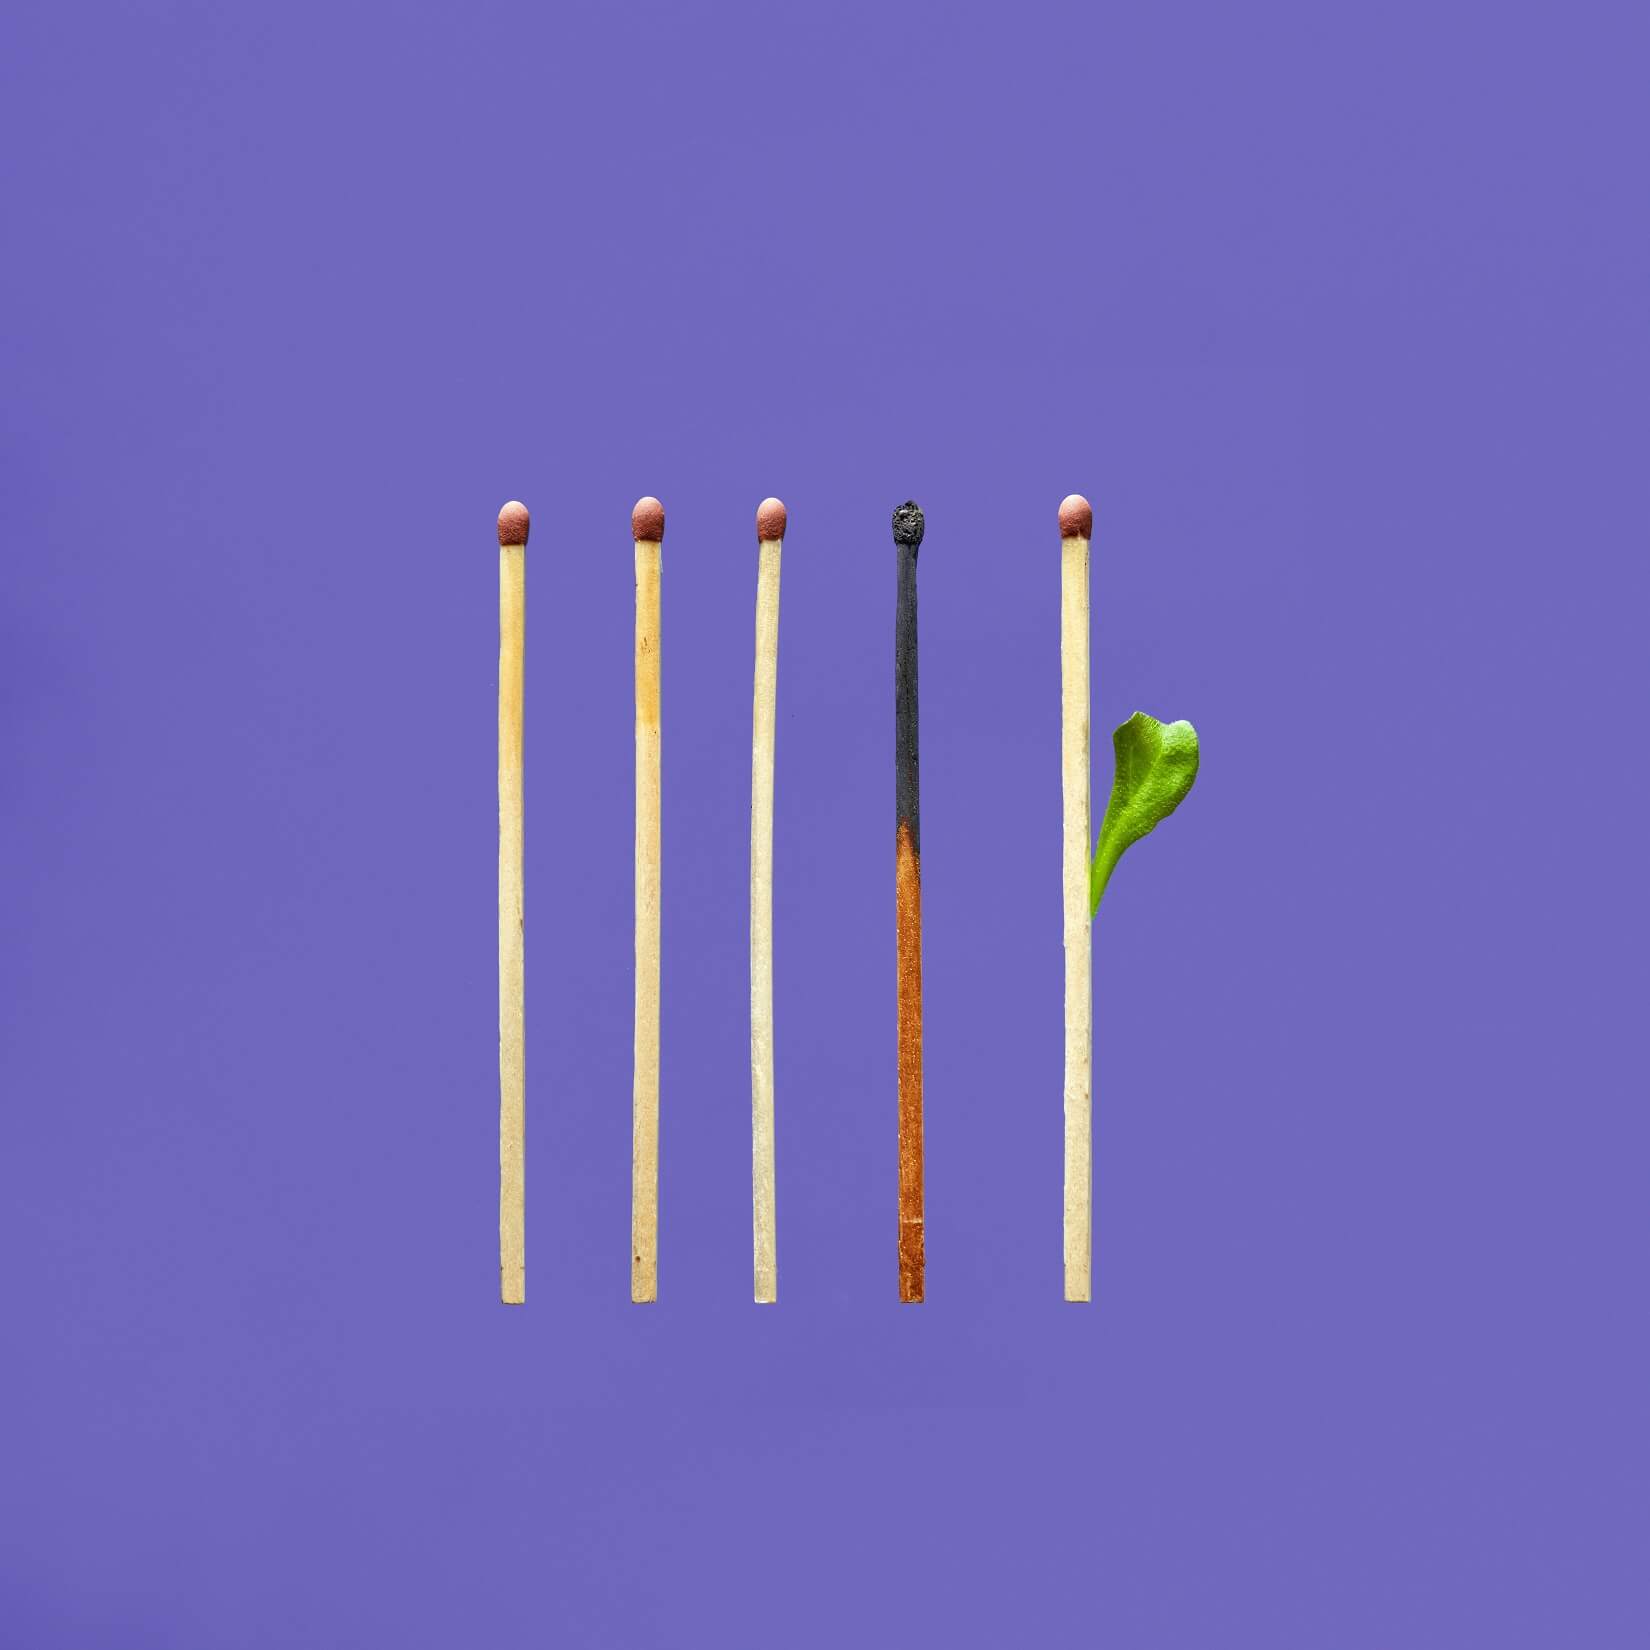 image of four matches burning out to show How to avoid burnout as an entrepreneur